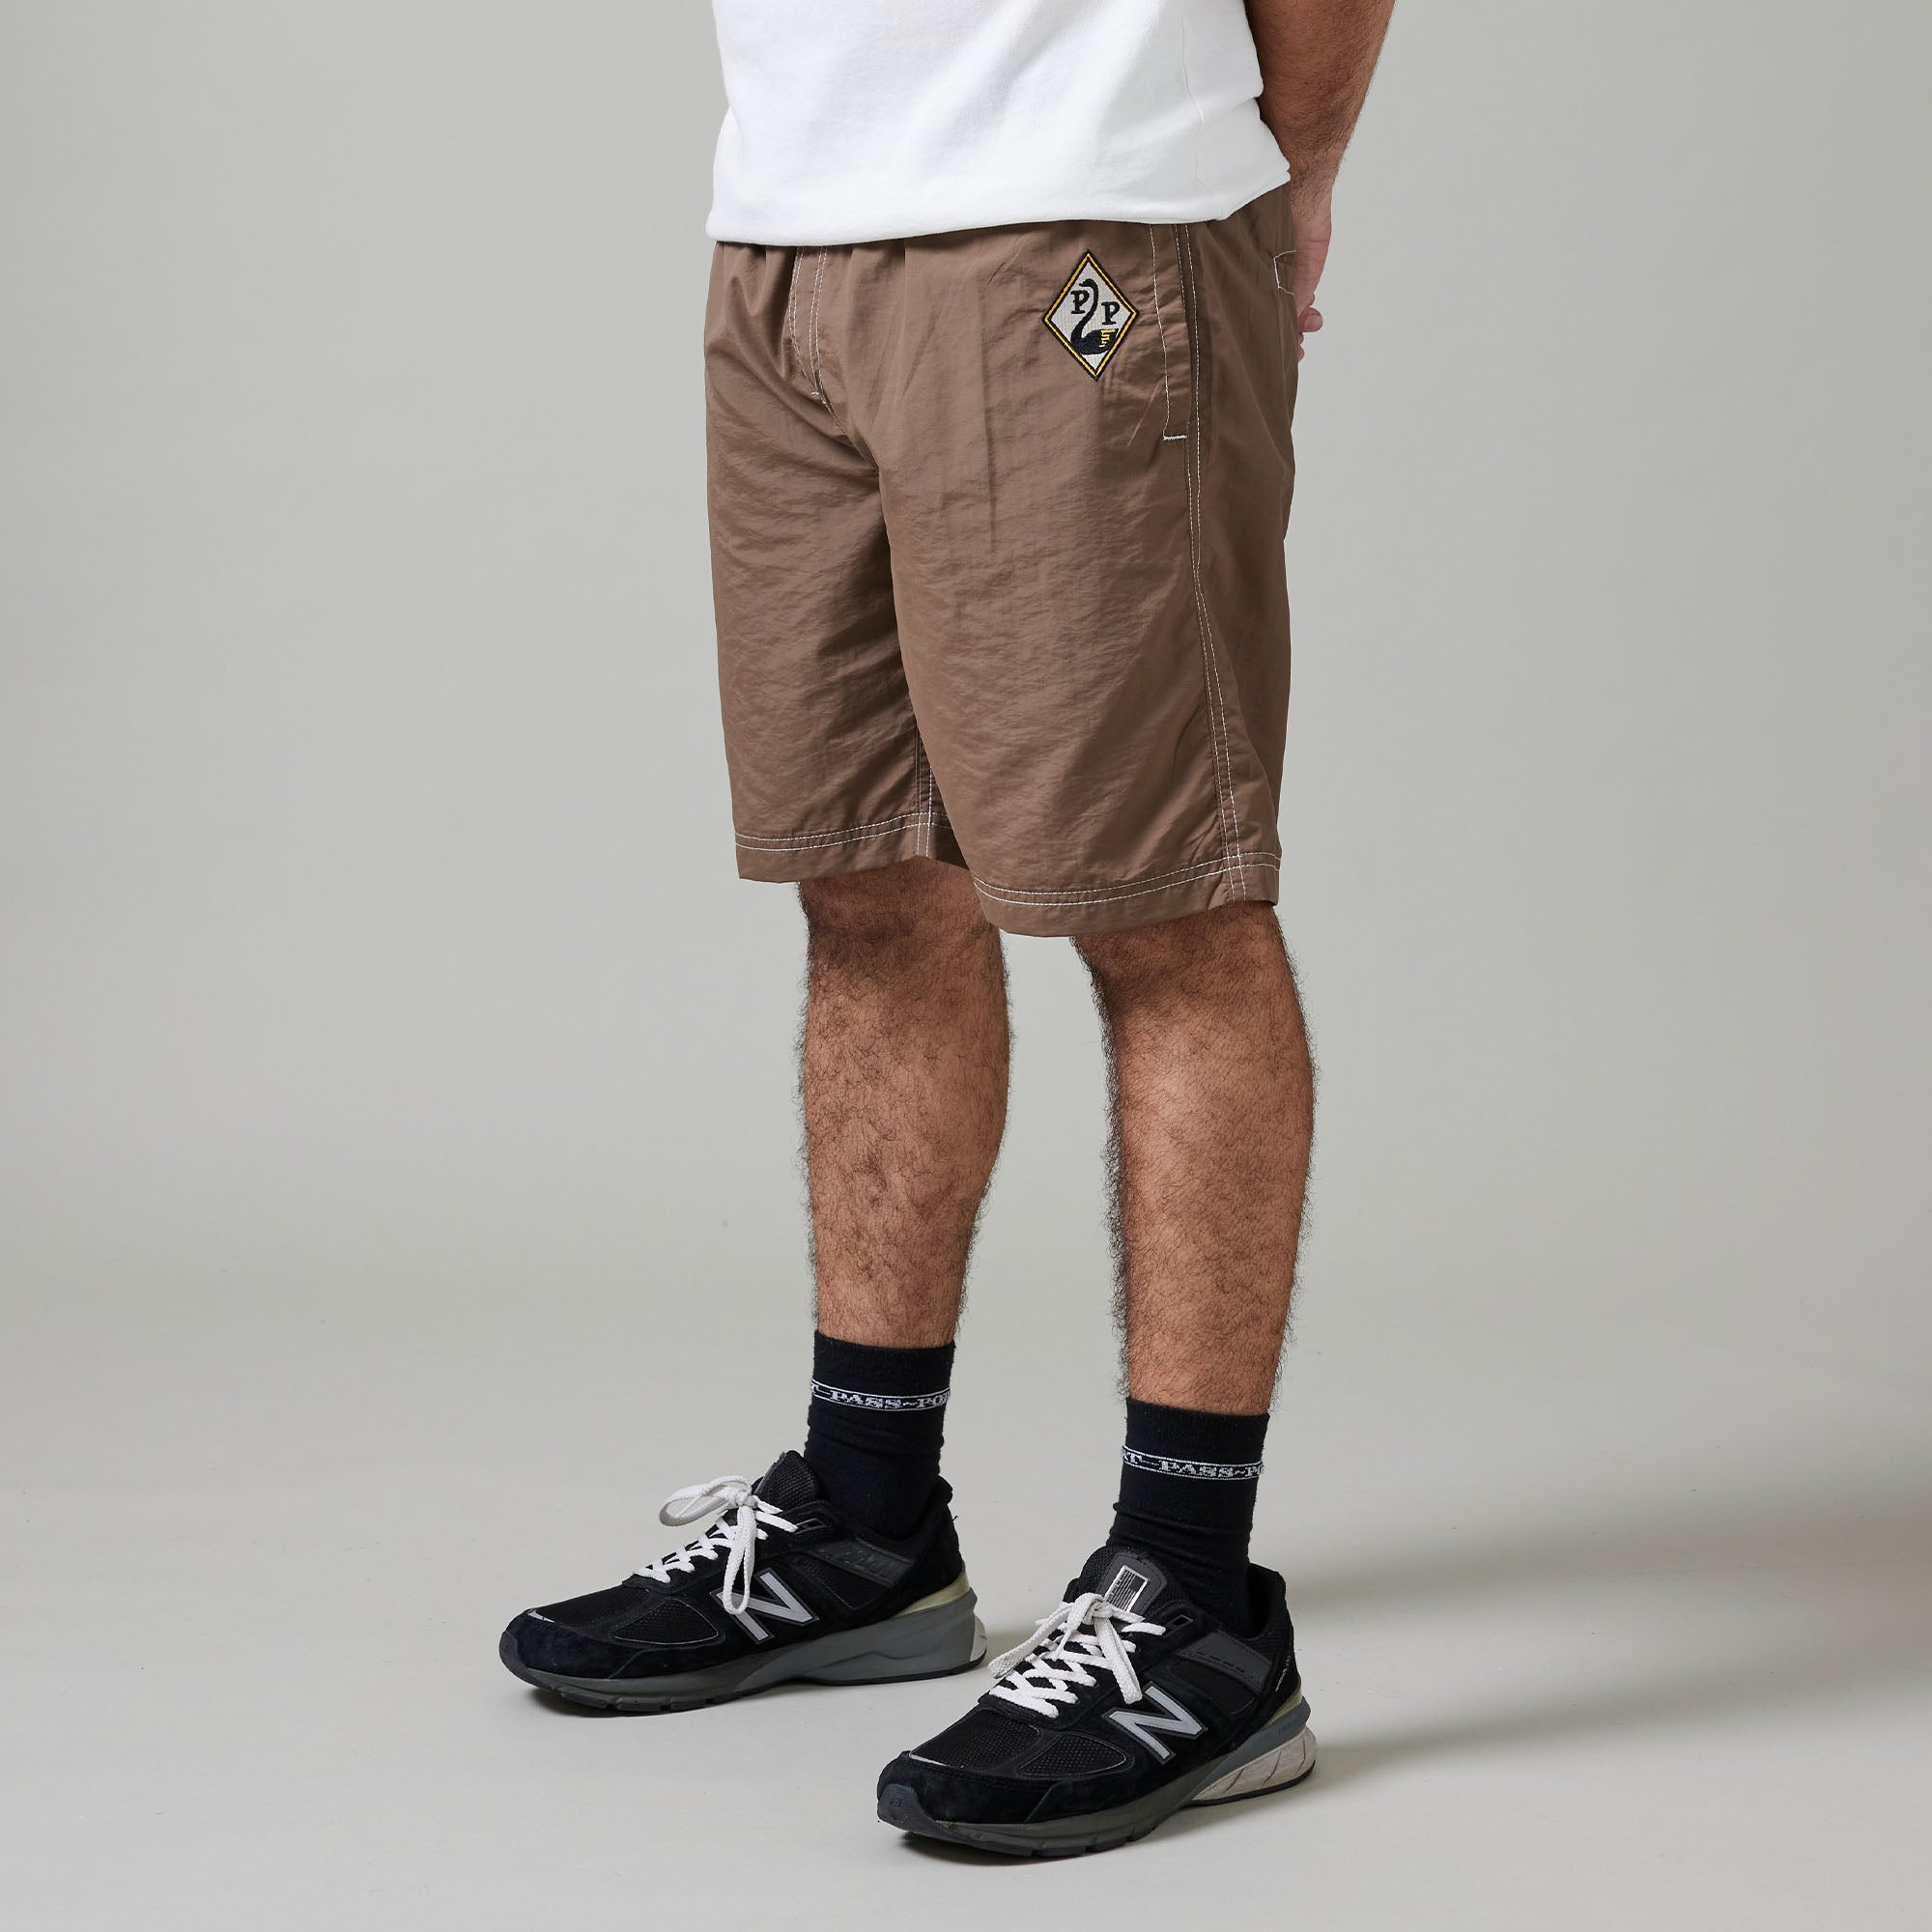 Pass~Port Swanny RPET Casual Short - Light Brown